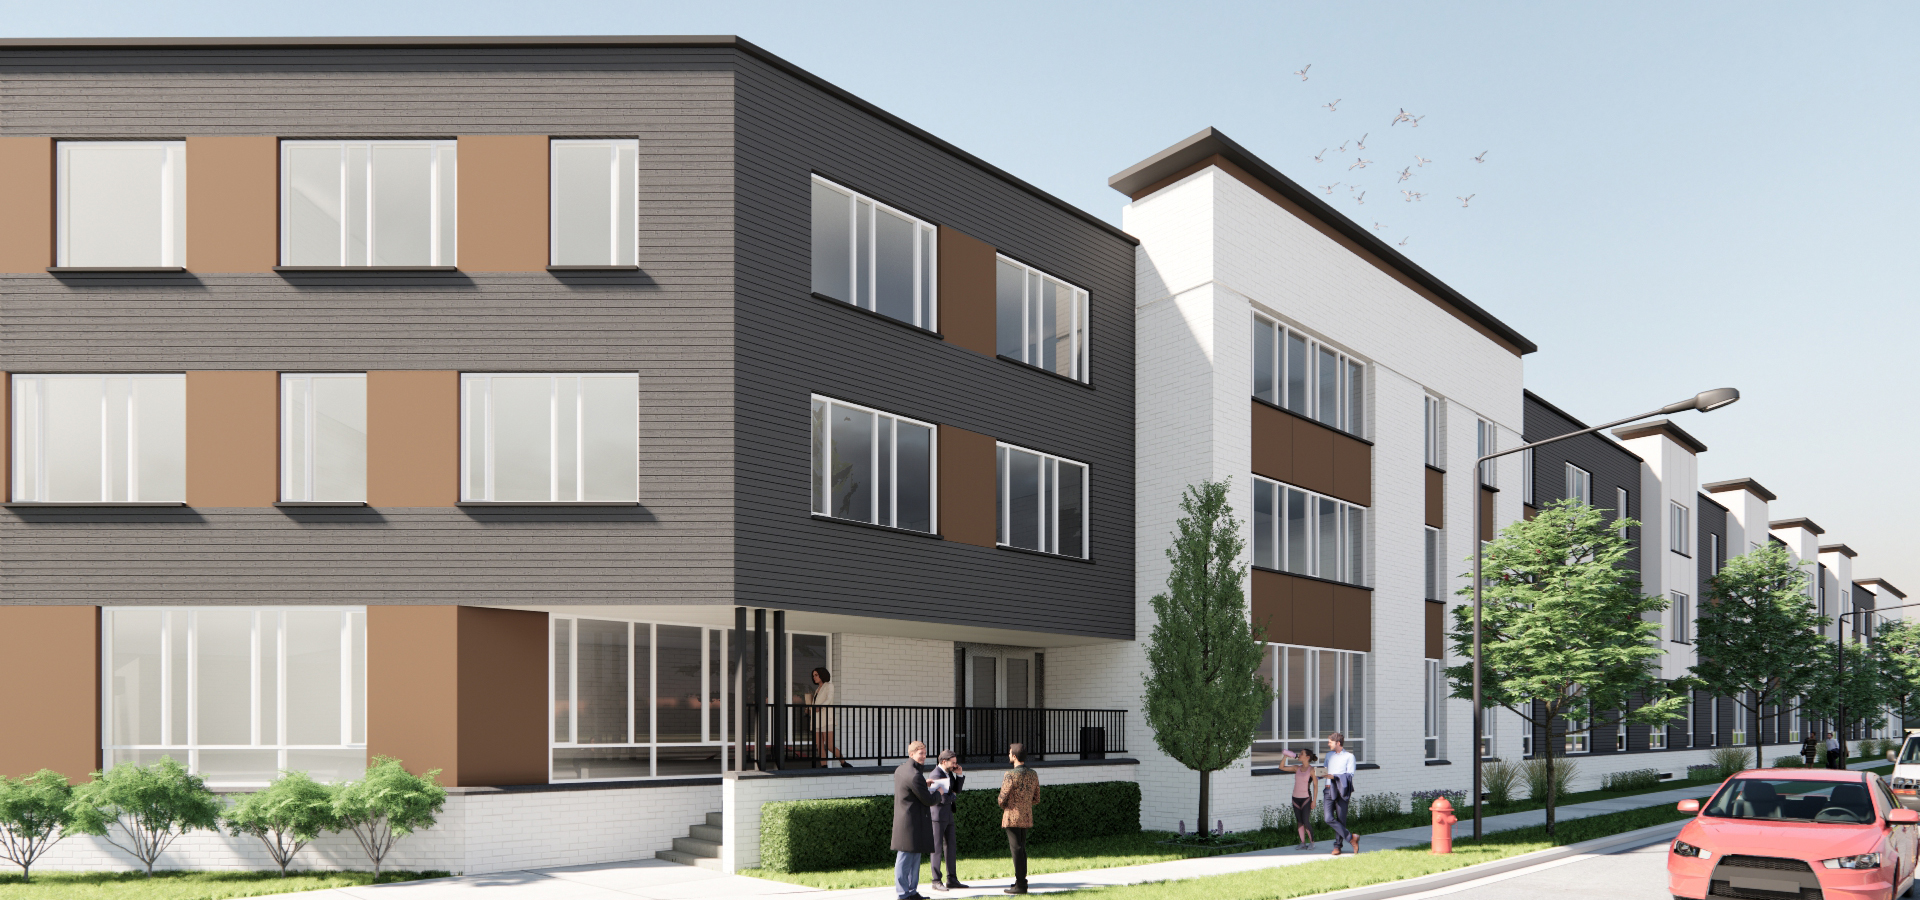 McShane to Build 172 Affordable Units in Sun Prairie, WI